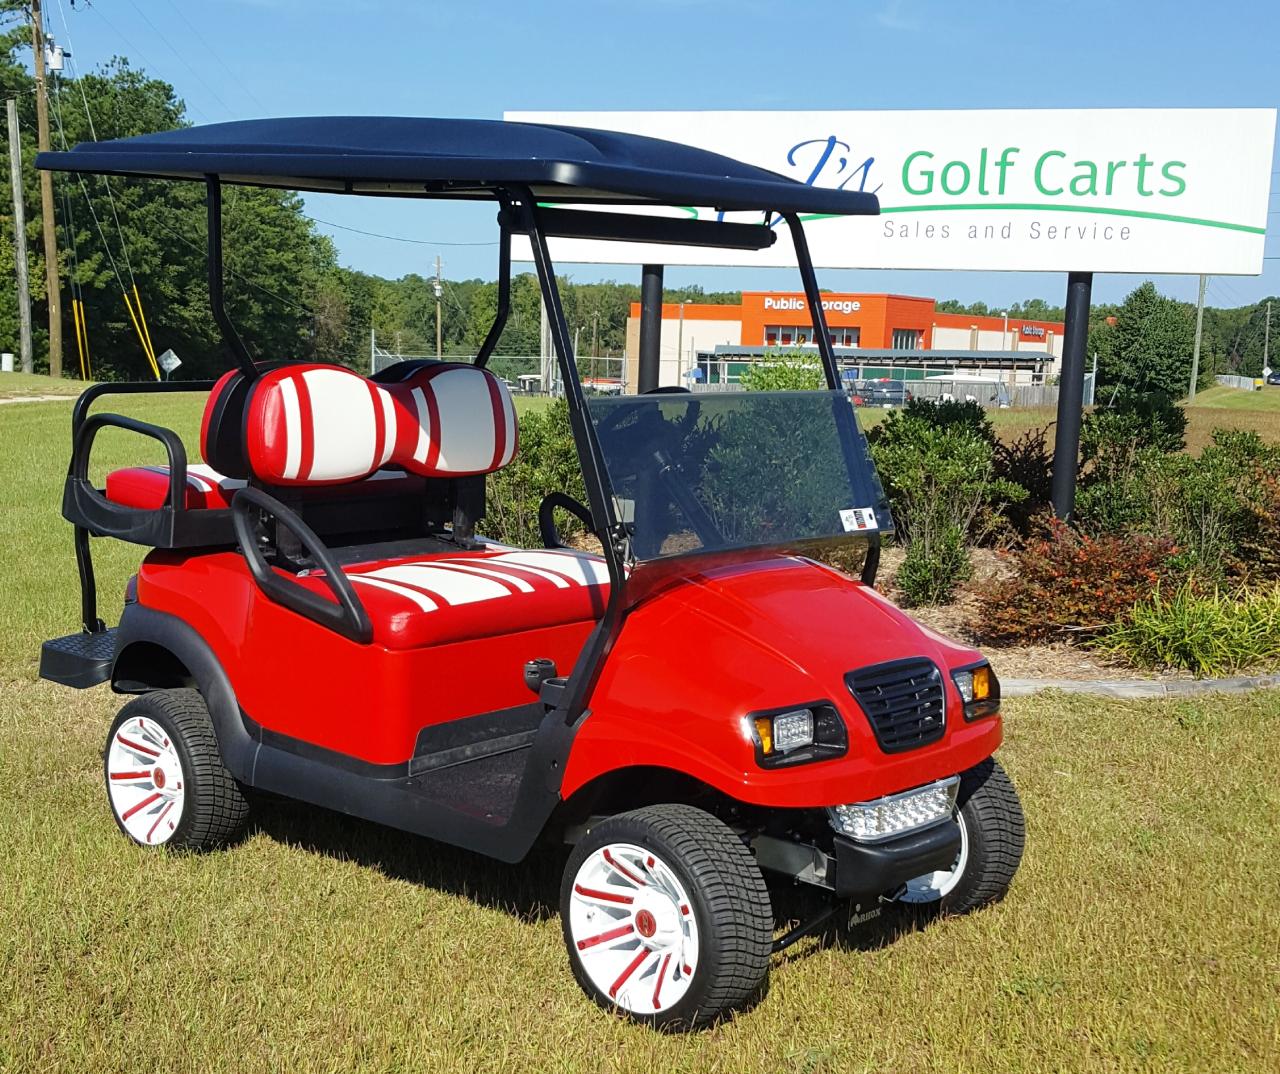 Discover Your Dream Golf Cart: Used Golf Carts for Sale by Owner in Washington, Utah